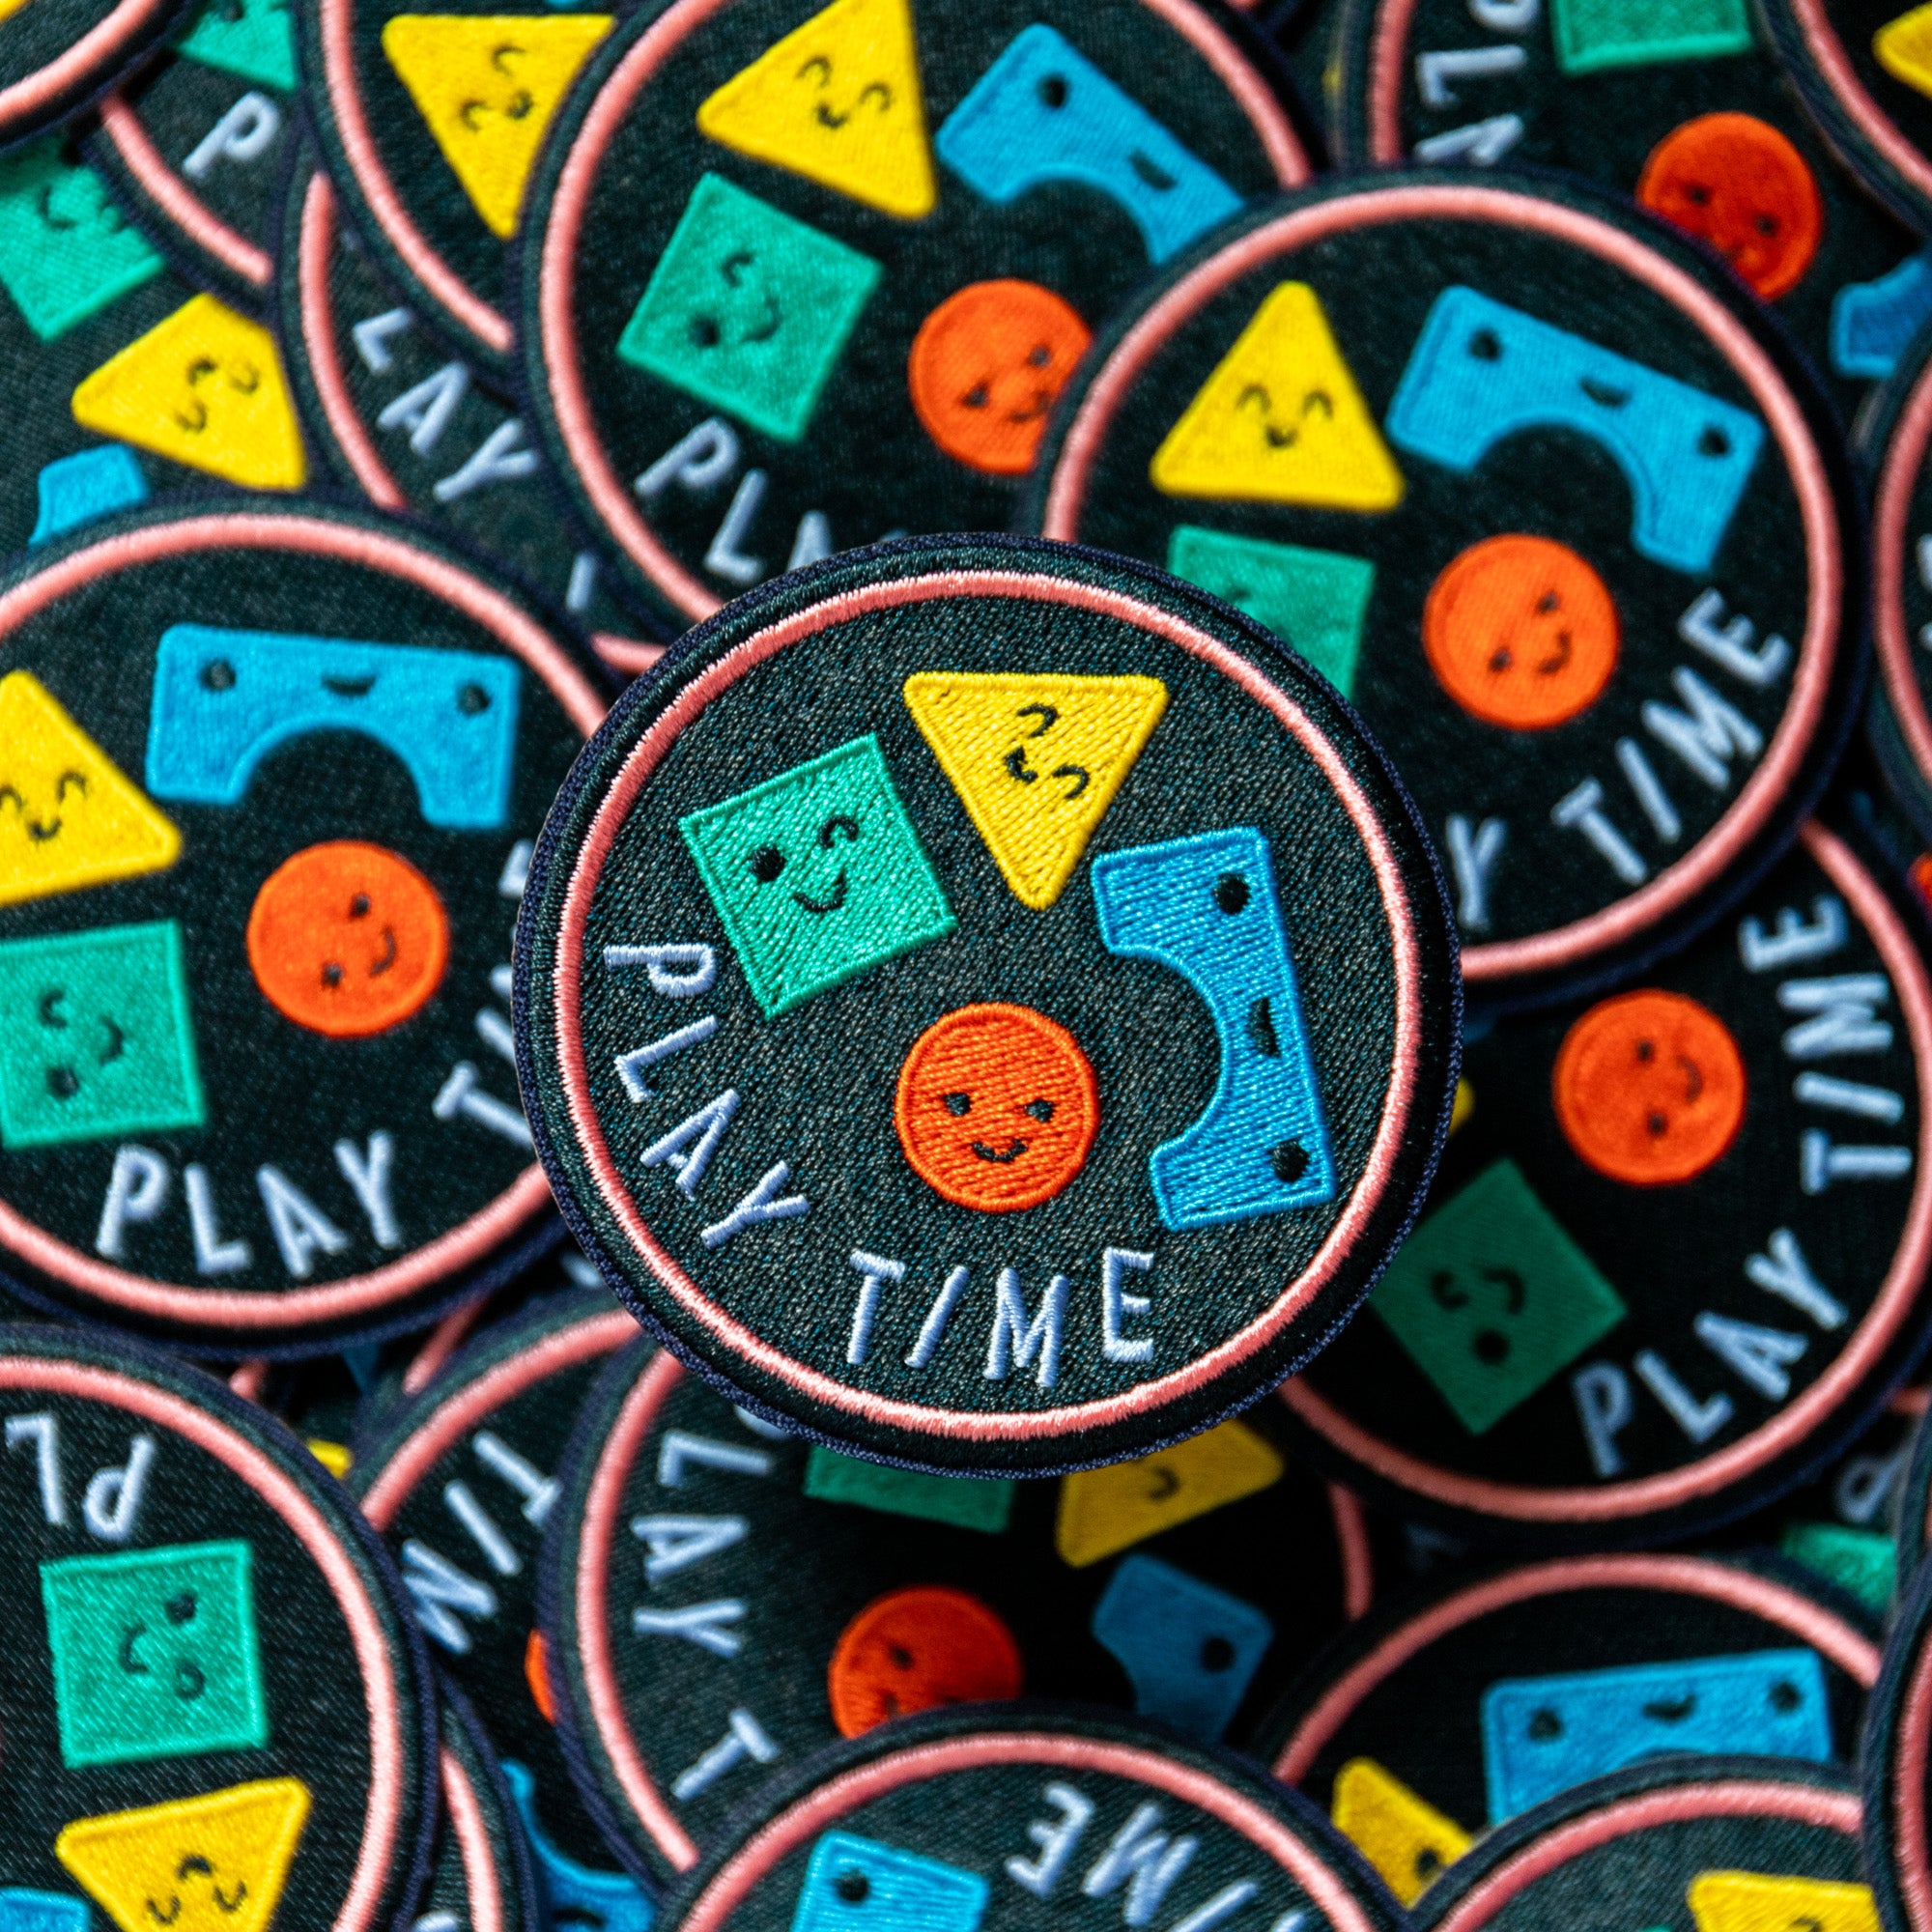 Play Time Patch - Finest Imaginary